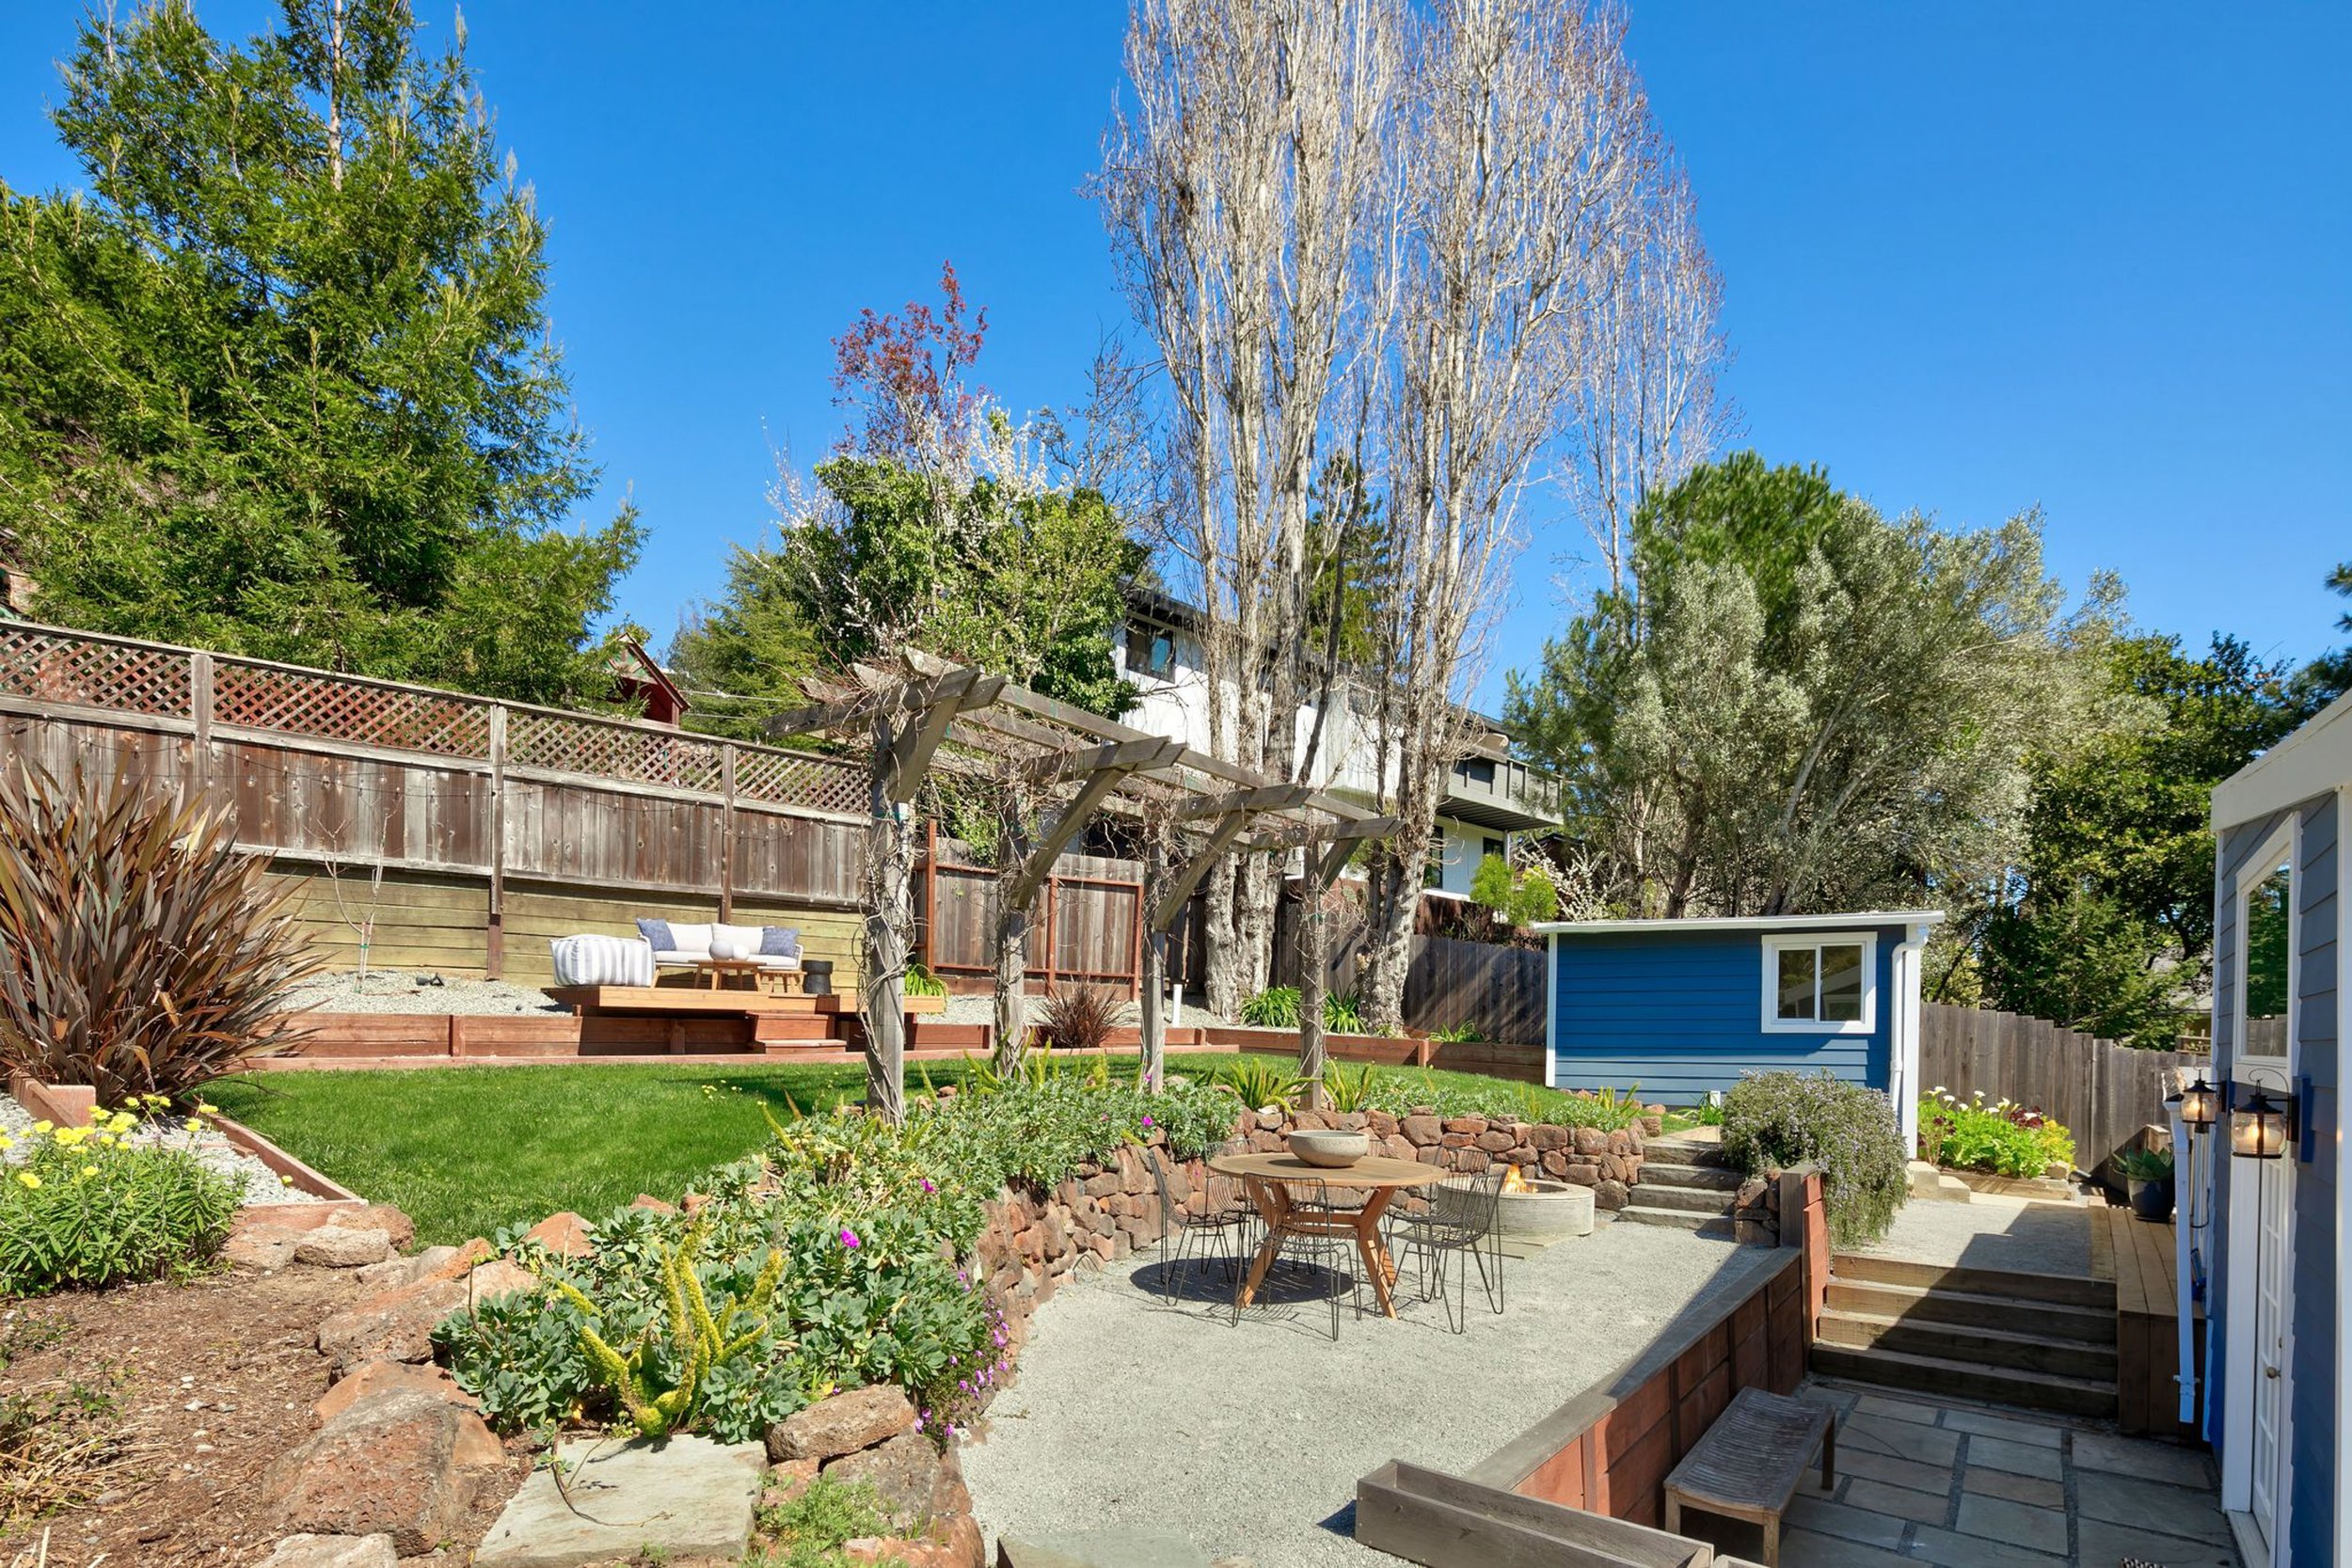 368 Shoreline Highway, Mill Valley listed by Mill Valley Realtor Allie Fornesi at Own Marin-26.jpg